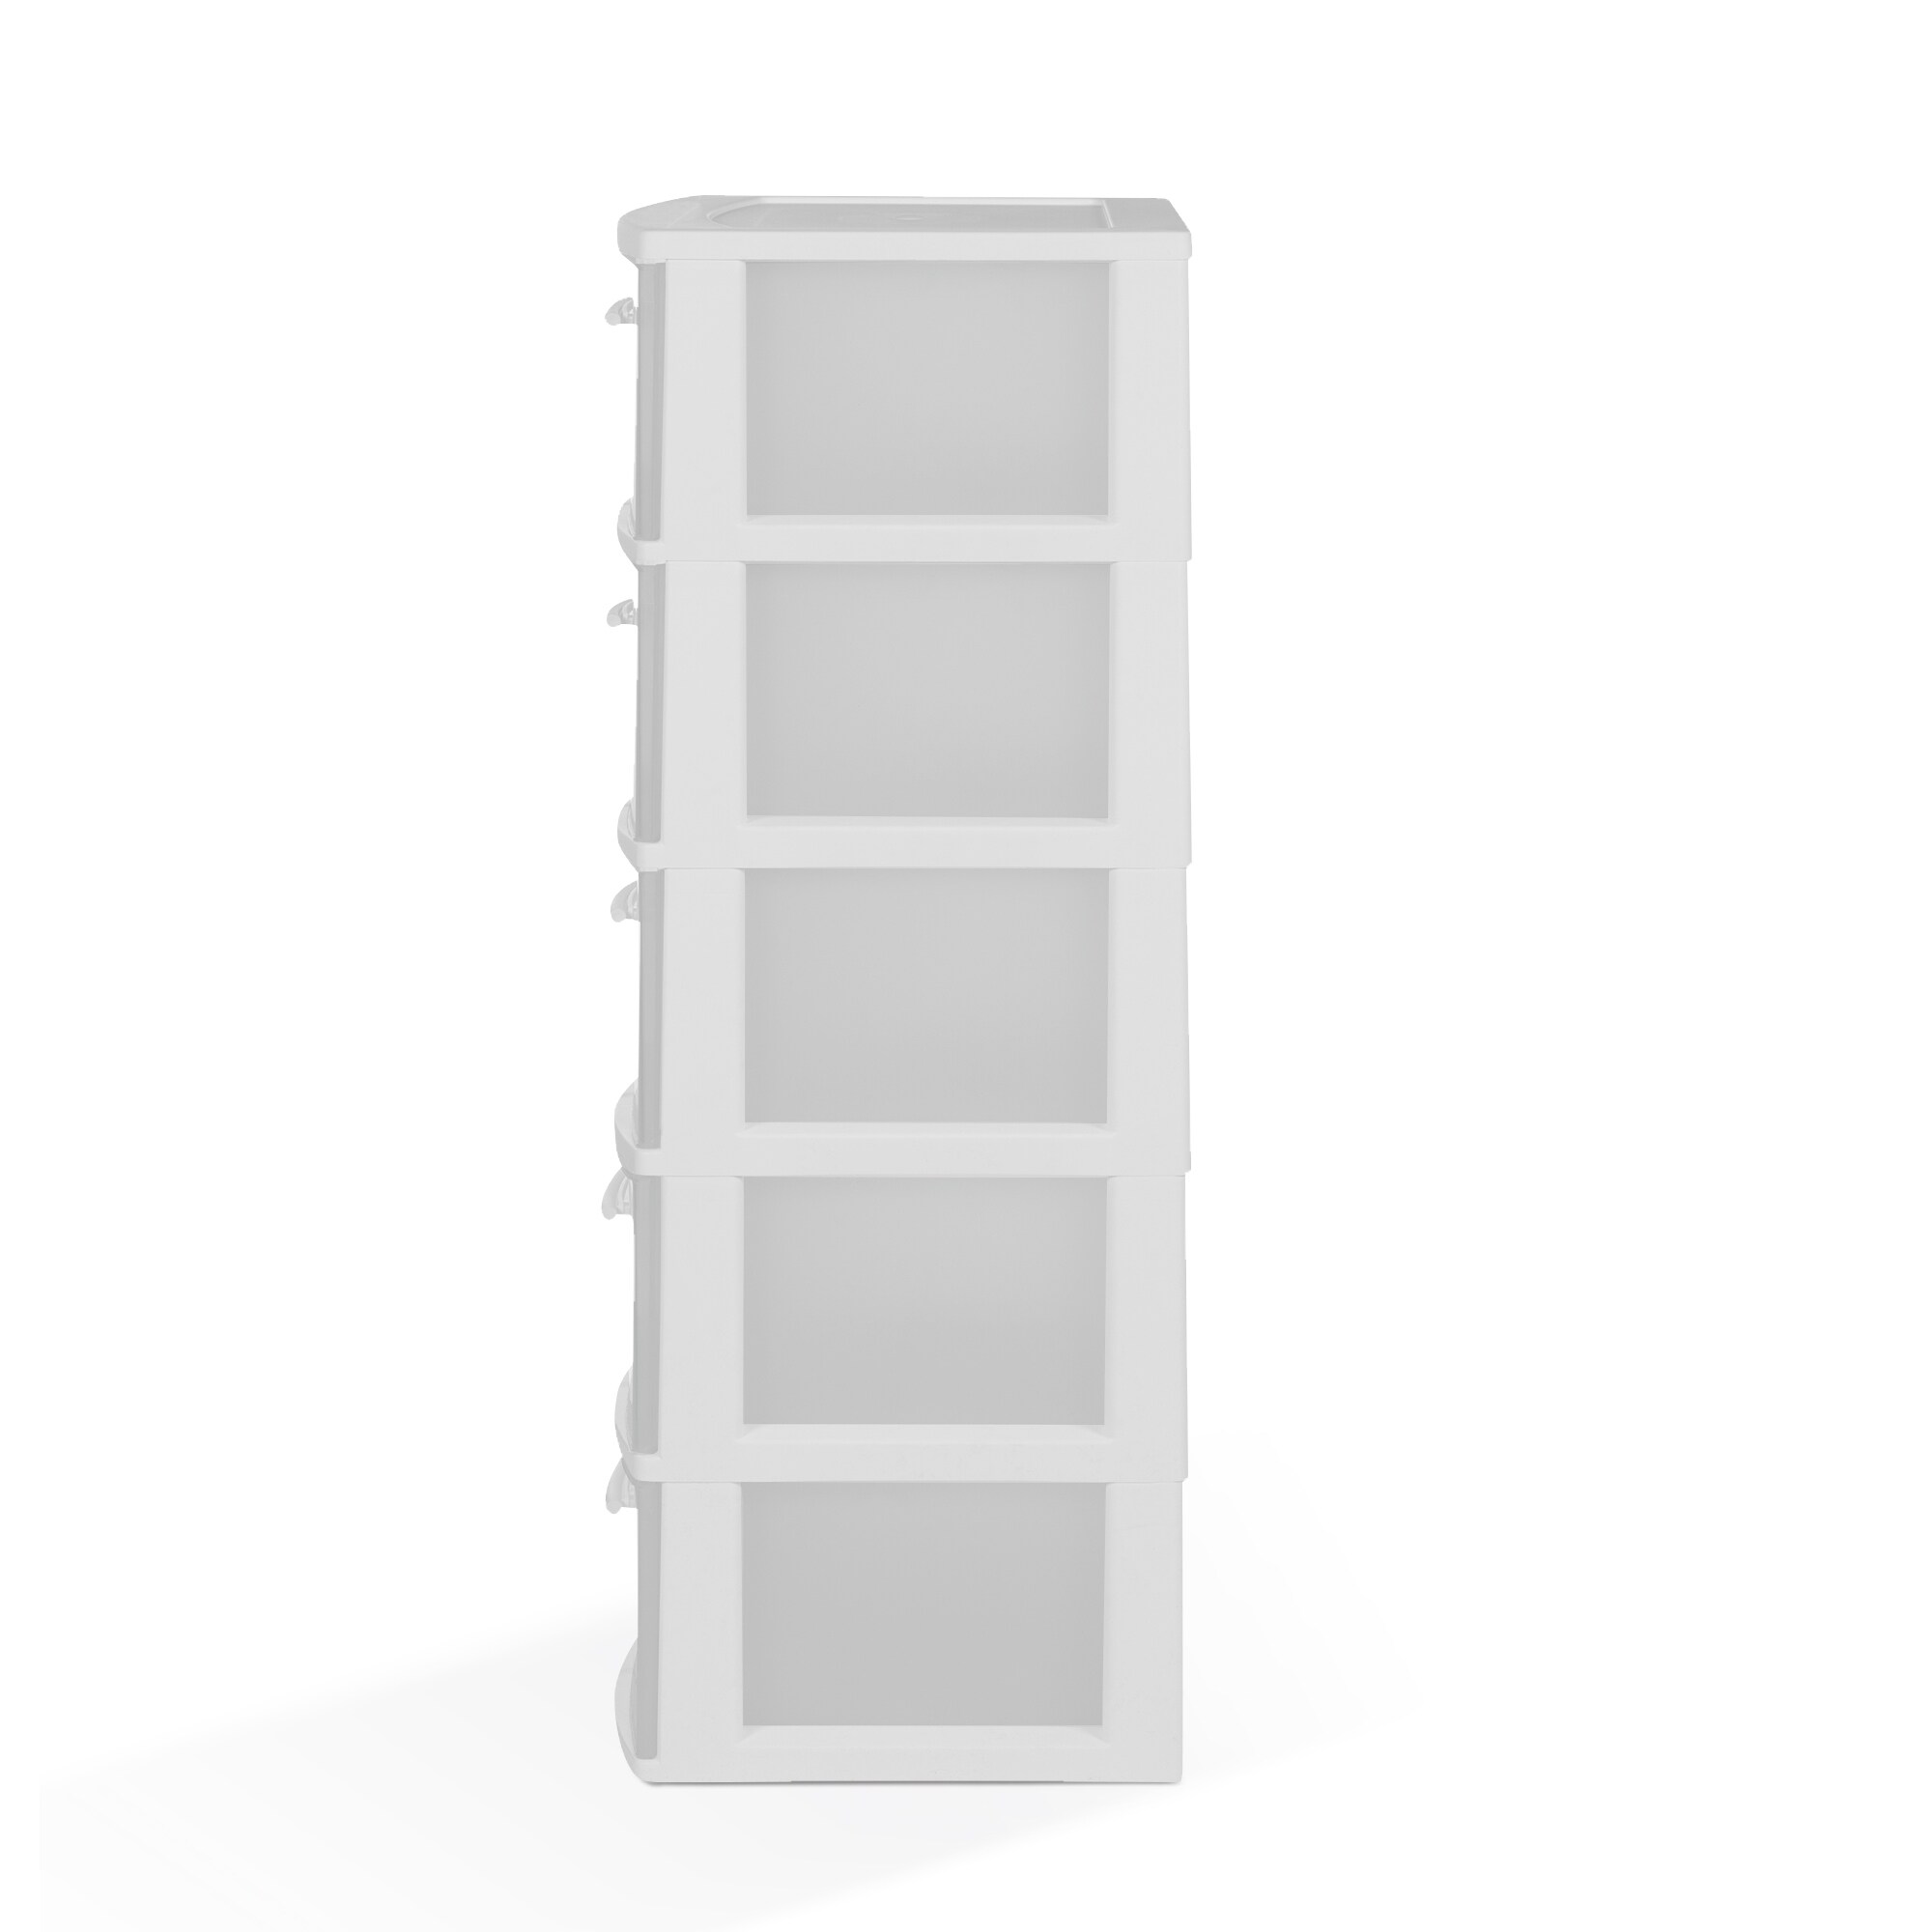 https://ak1.ostkcdn.com/images/products/is/images/direct/6339221cf4c0b1ddd26f7193366166a153e55f0b/MQ-Eclypse-5-Drawer-Plastic-Storage-Unit-with-Clear-Drawers-%282-Pack%29.jpg